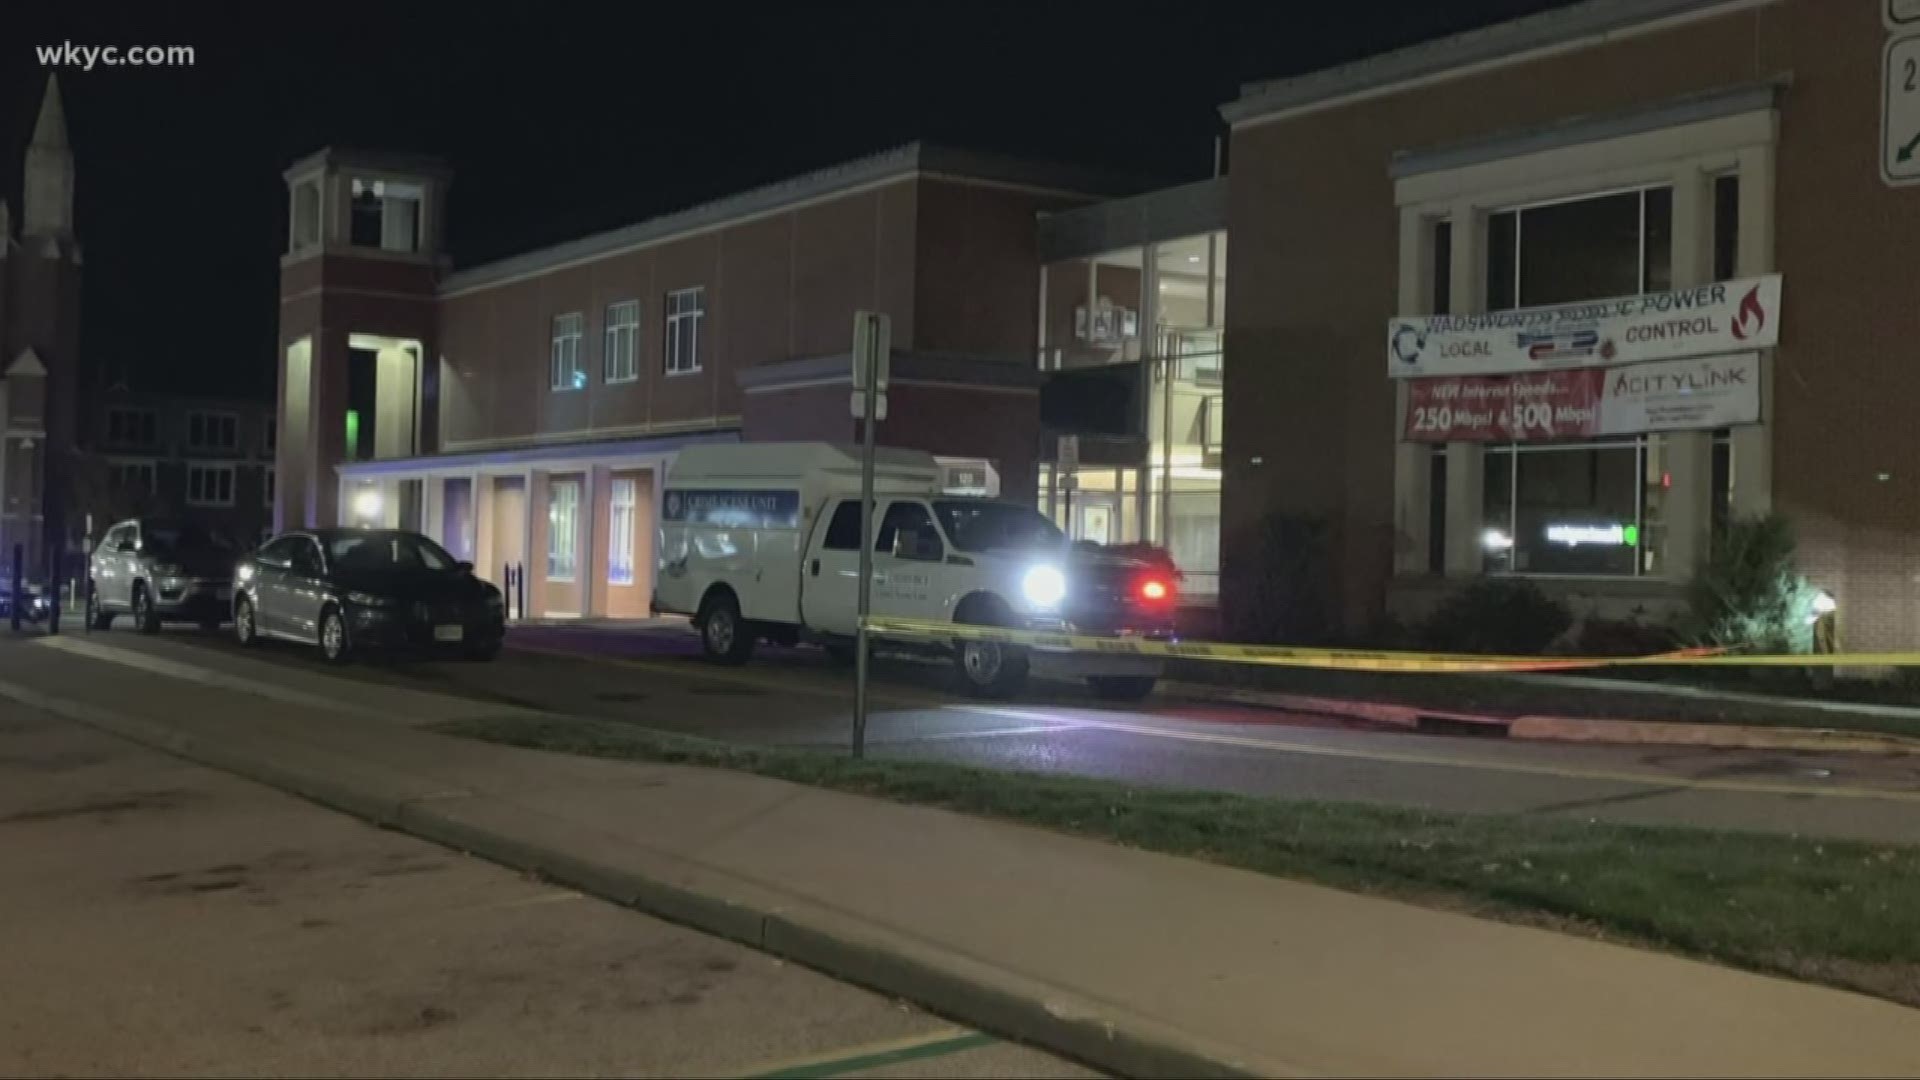 Nov. 8, 2019: Investigators spent Thursday evening at the scene of an officer-involved shooting outside of Wadsworth City Hall.